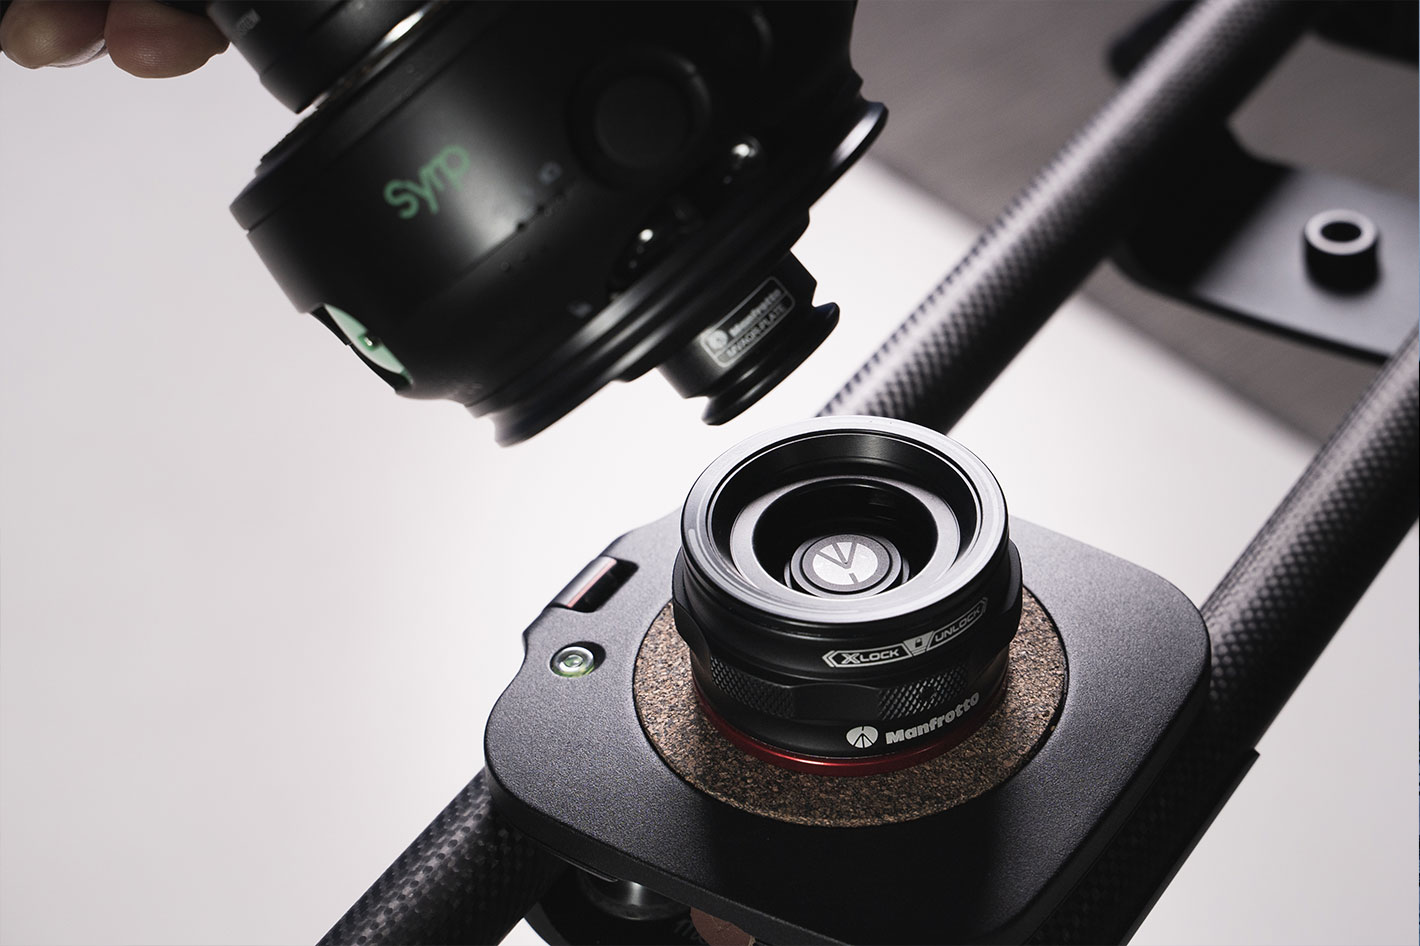 Manfrotto MOVE: a whole new way to move cameras